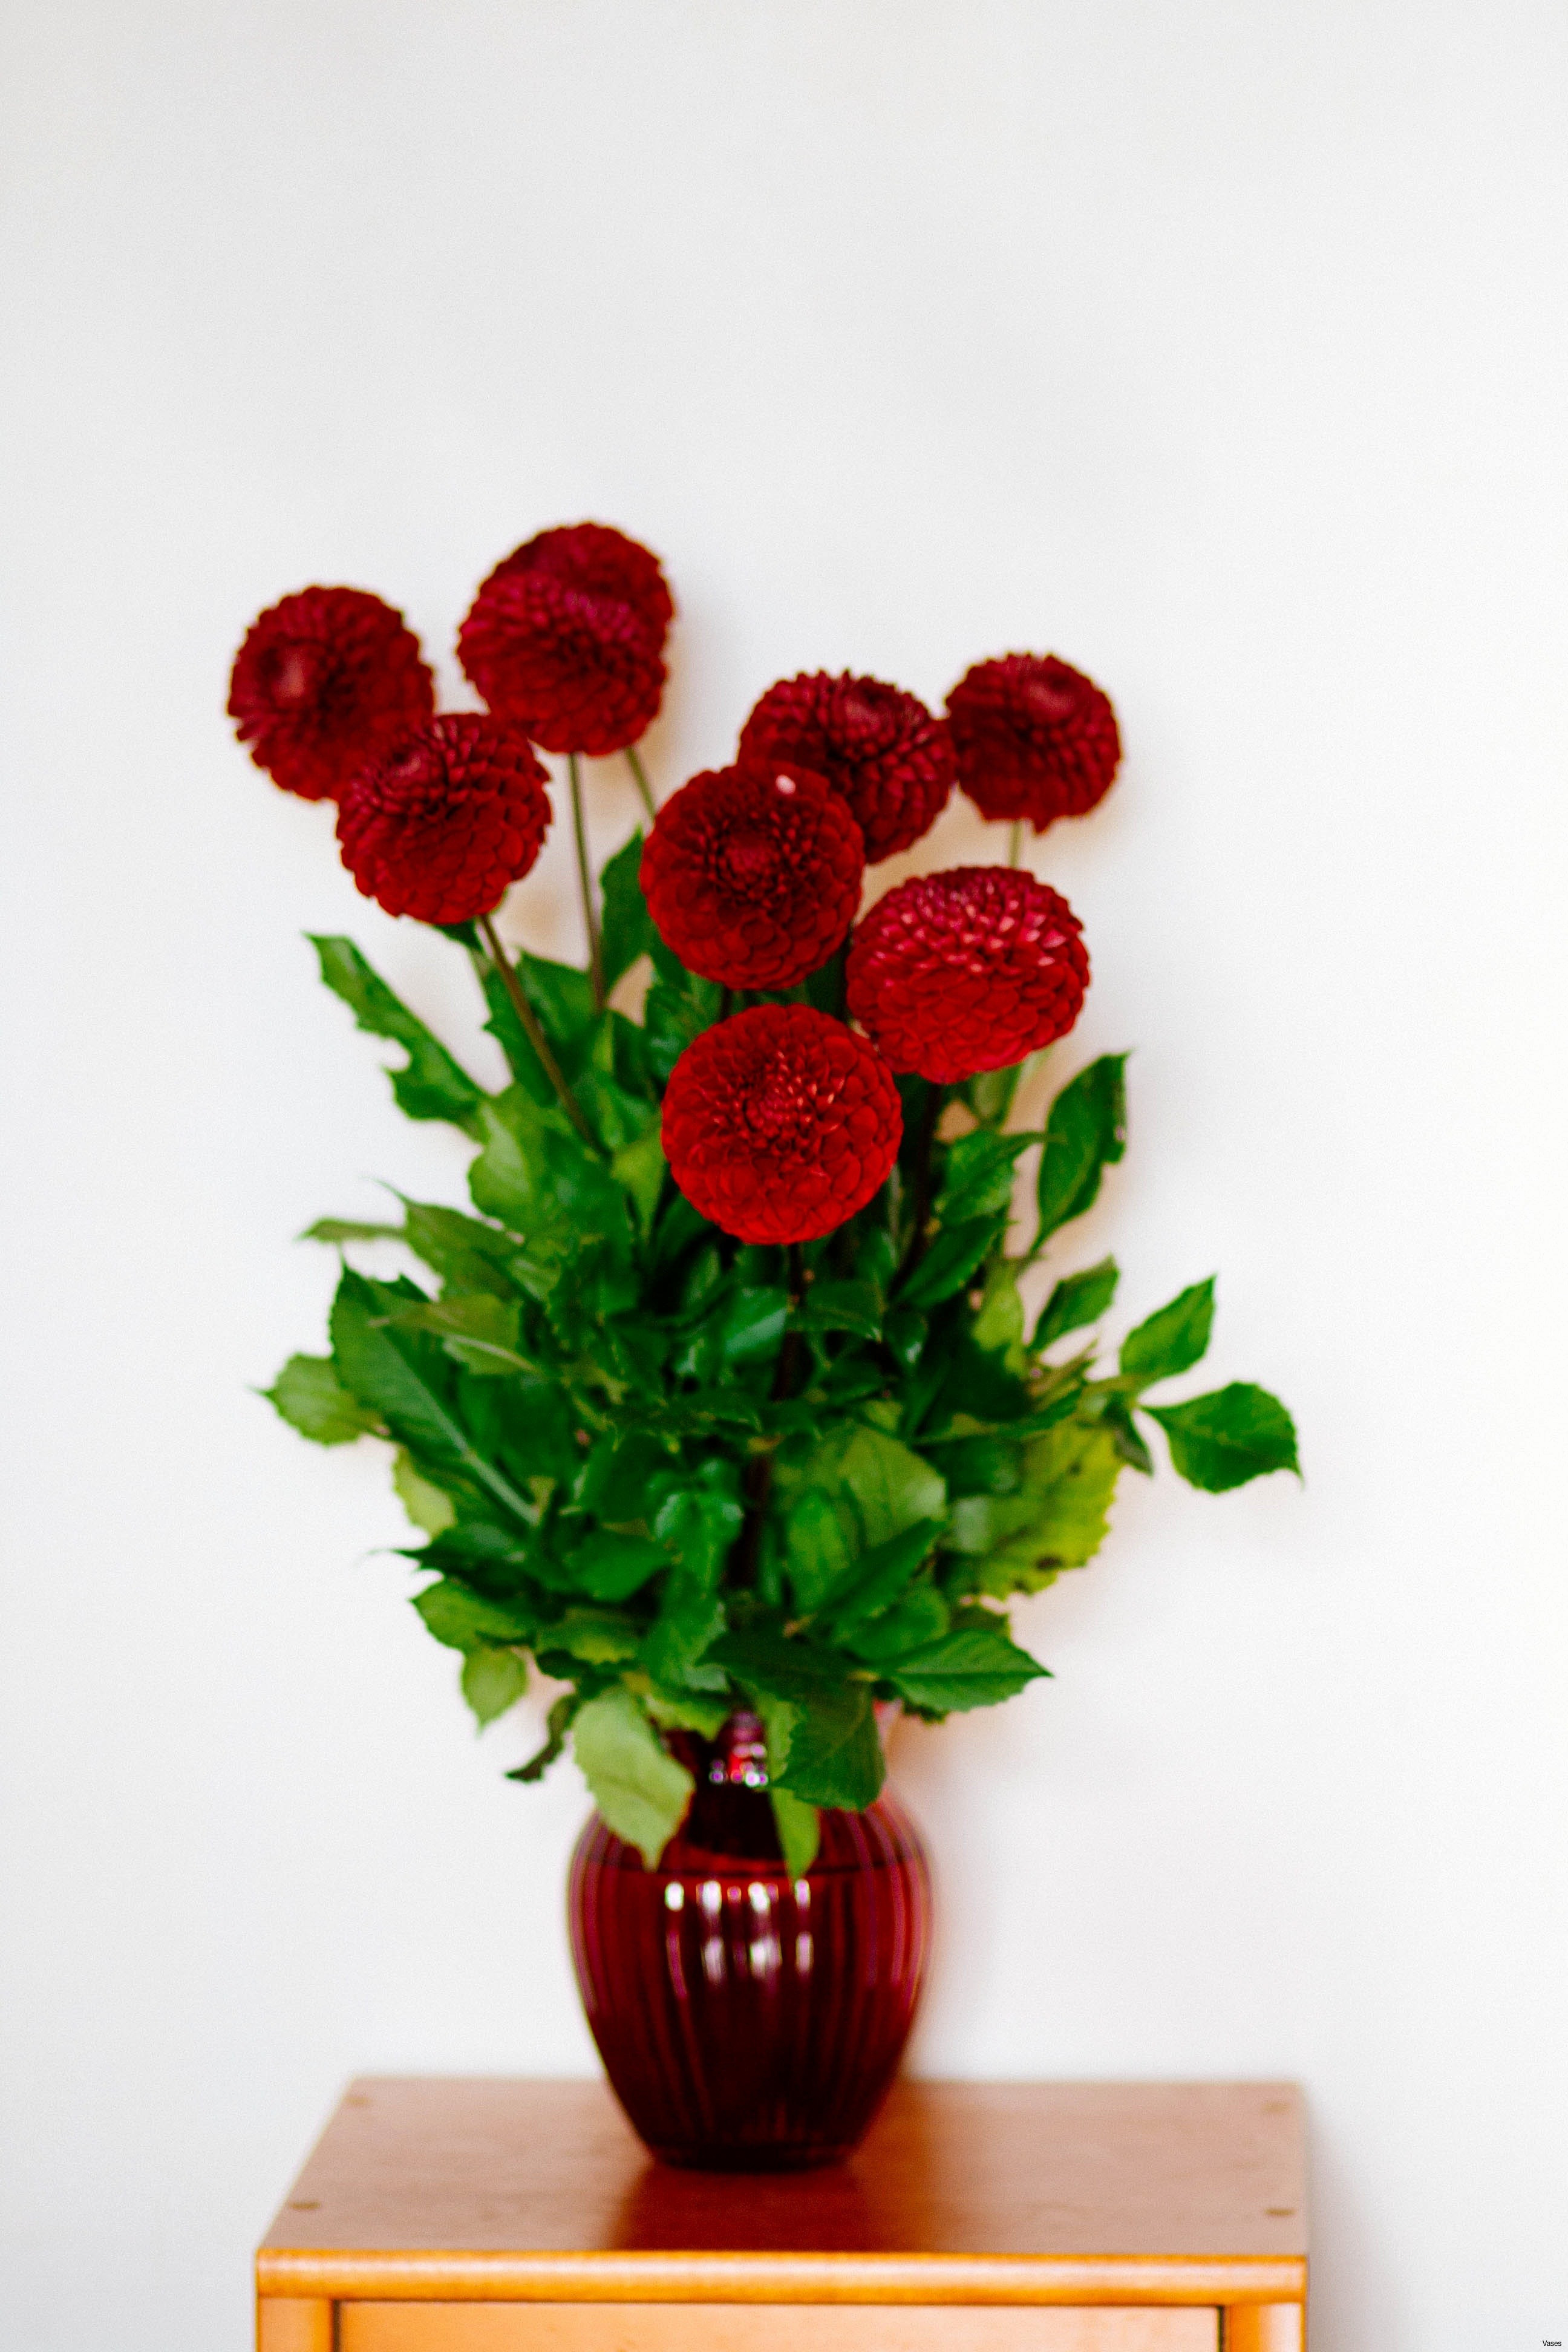 21 Fashionable Giant Glass Vase 2024 free download giant glass vase of fake flowers flowers wallpapers lovely flower image pic awesome in fake flowers flowers wallpapers lovely flower image pic awesome vases floor vase flowers with flowersi 